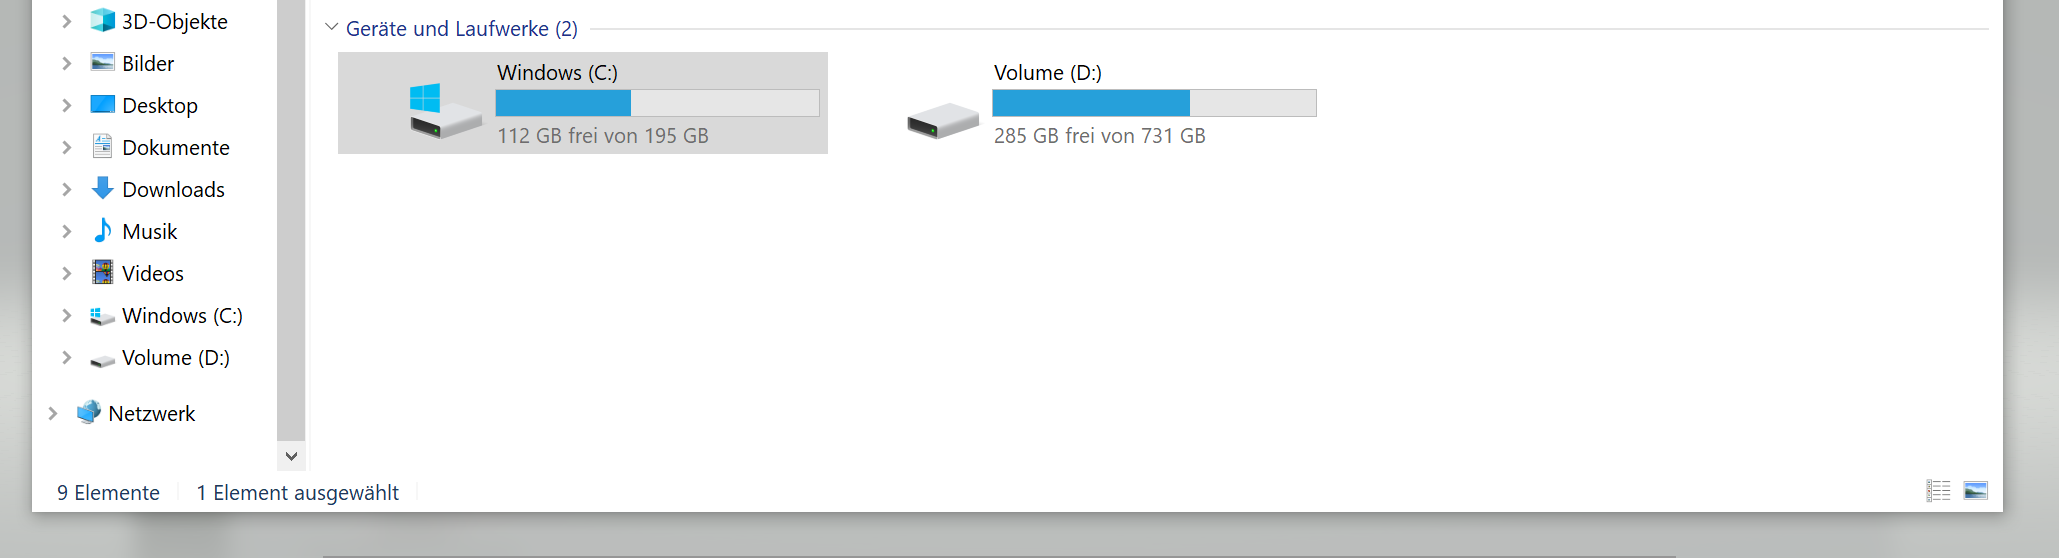 Download sizes up to 130GB - General Discussion - Microsoft Flight